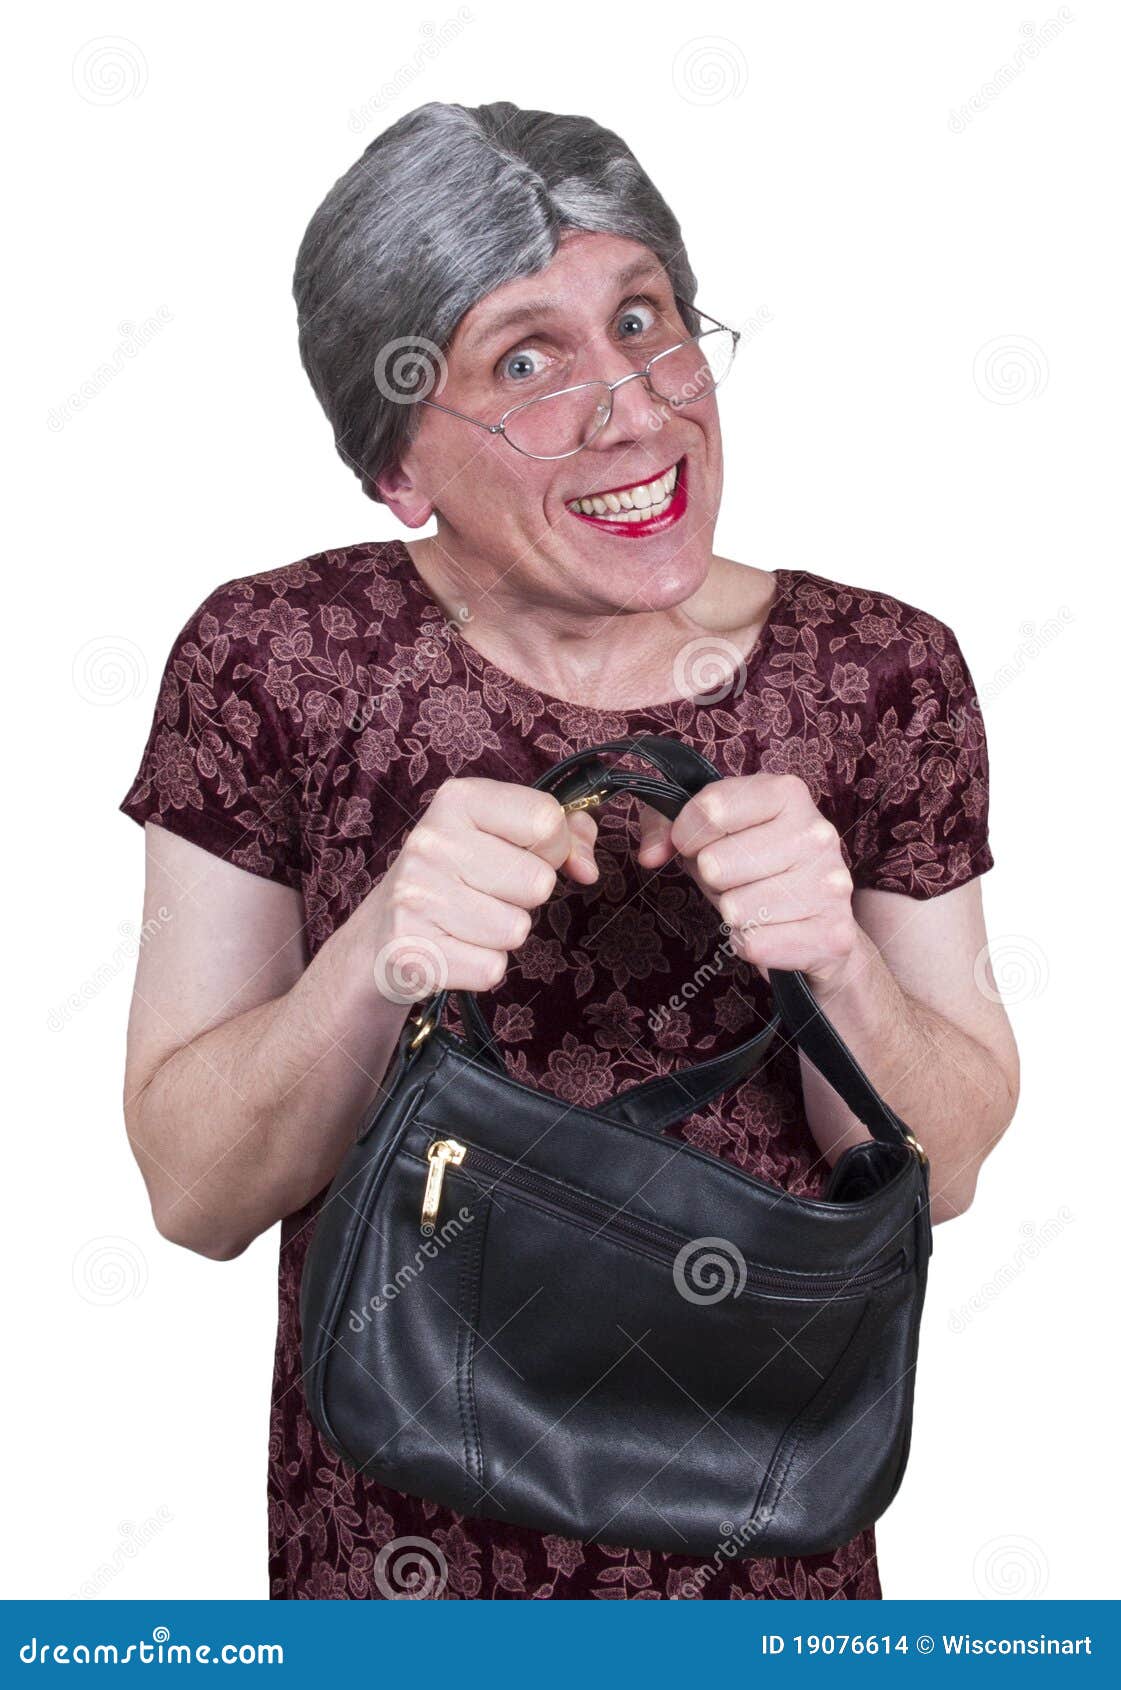 Funny Ugly Grandma, Granny, or Shy Maiden Aunt Stock Photo - Image of  smile, white: 19076614